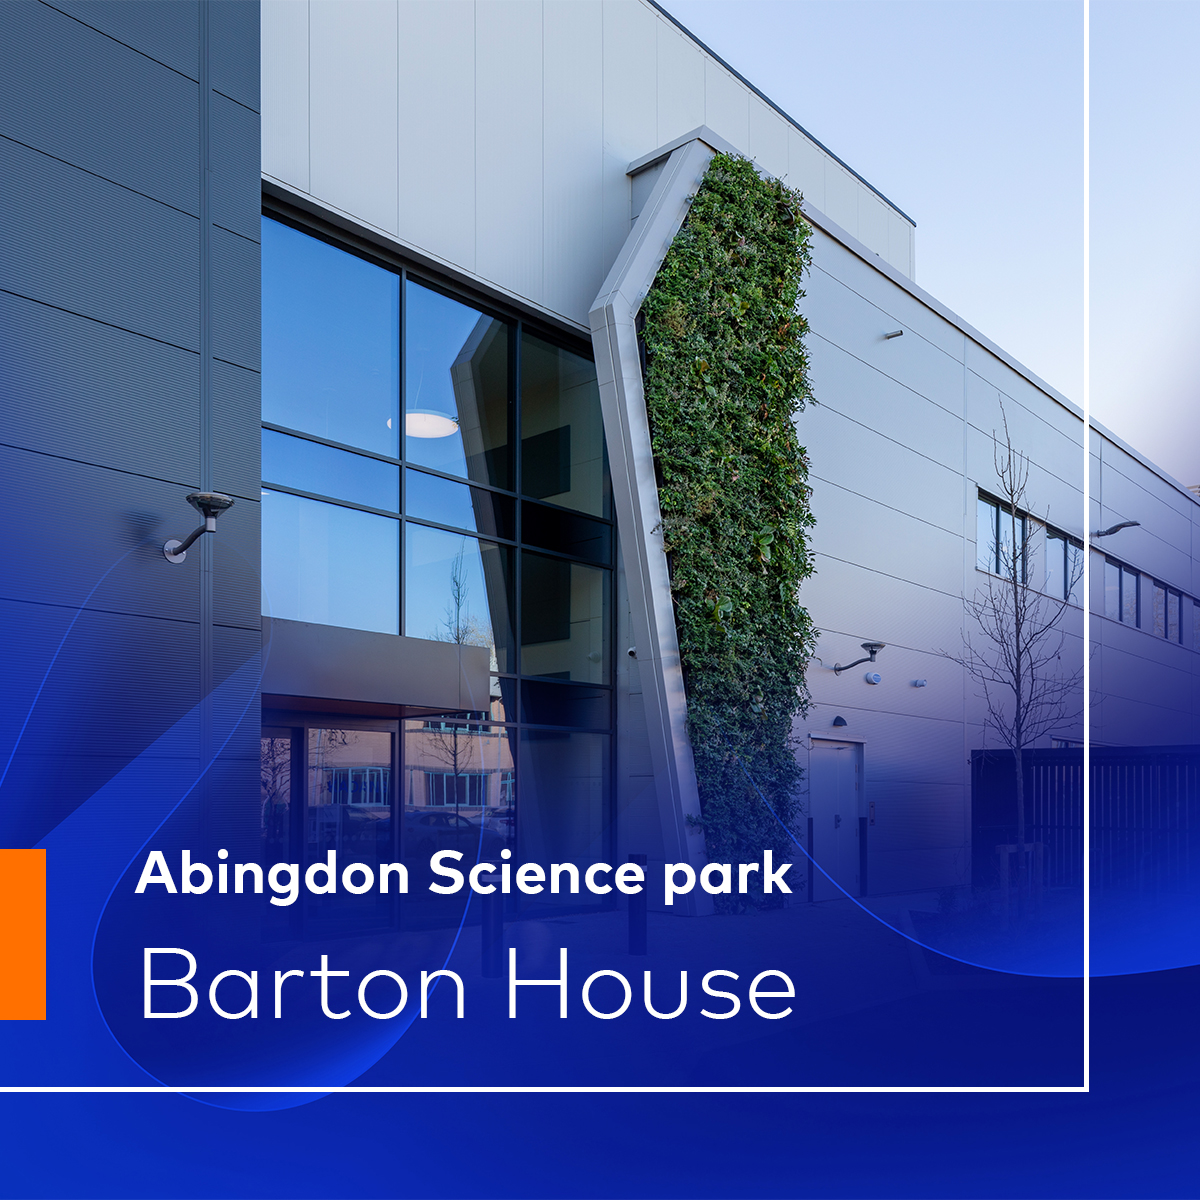 Kadans Science Partner adds to Oxfordshire’s laboratory supply with the completion of Barton House. Join the established cluster of innovative businesses on Abingdon Science Park! Read the full news kadans.co.uk/kadans-science…